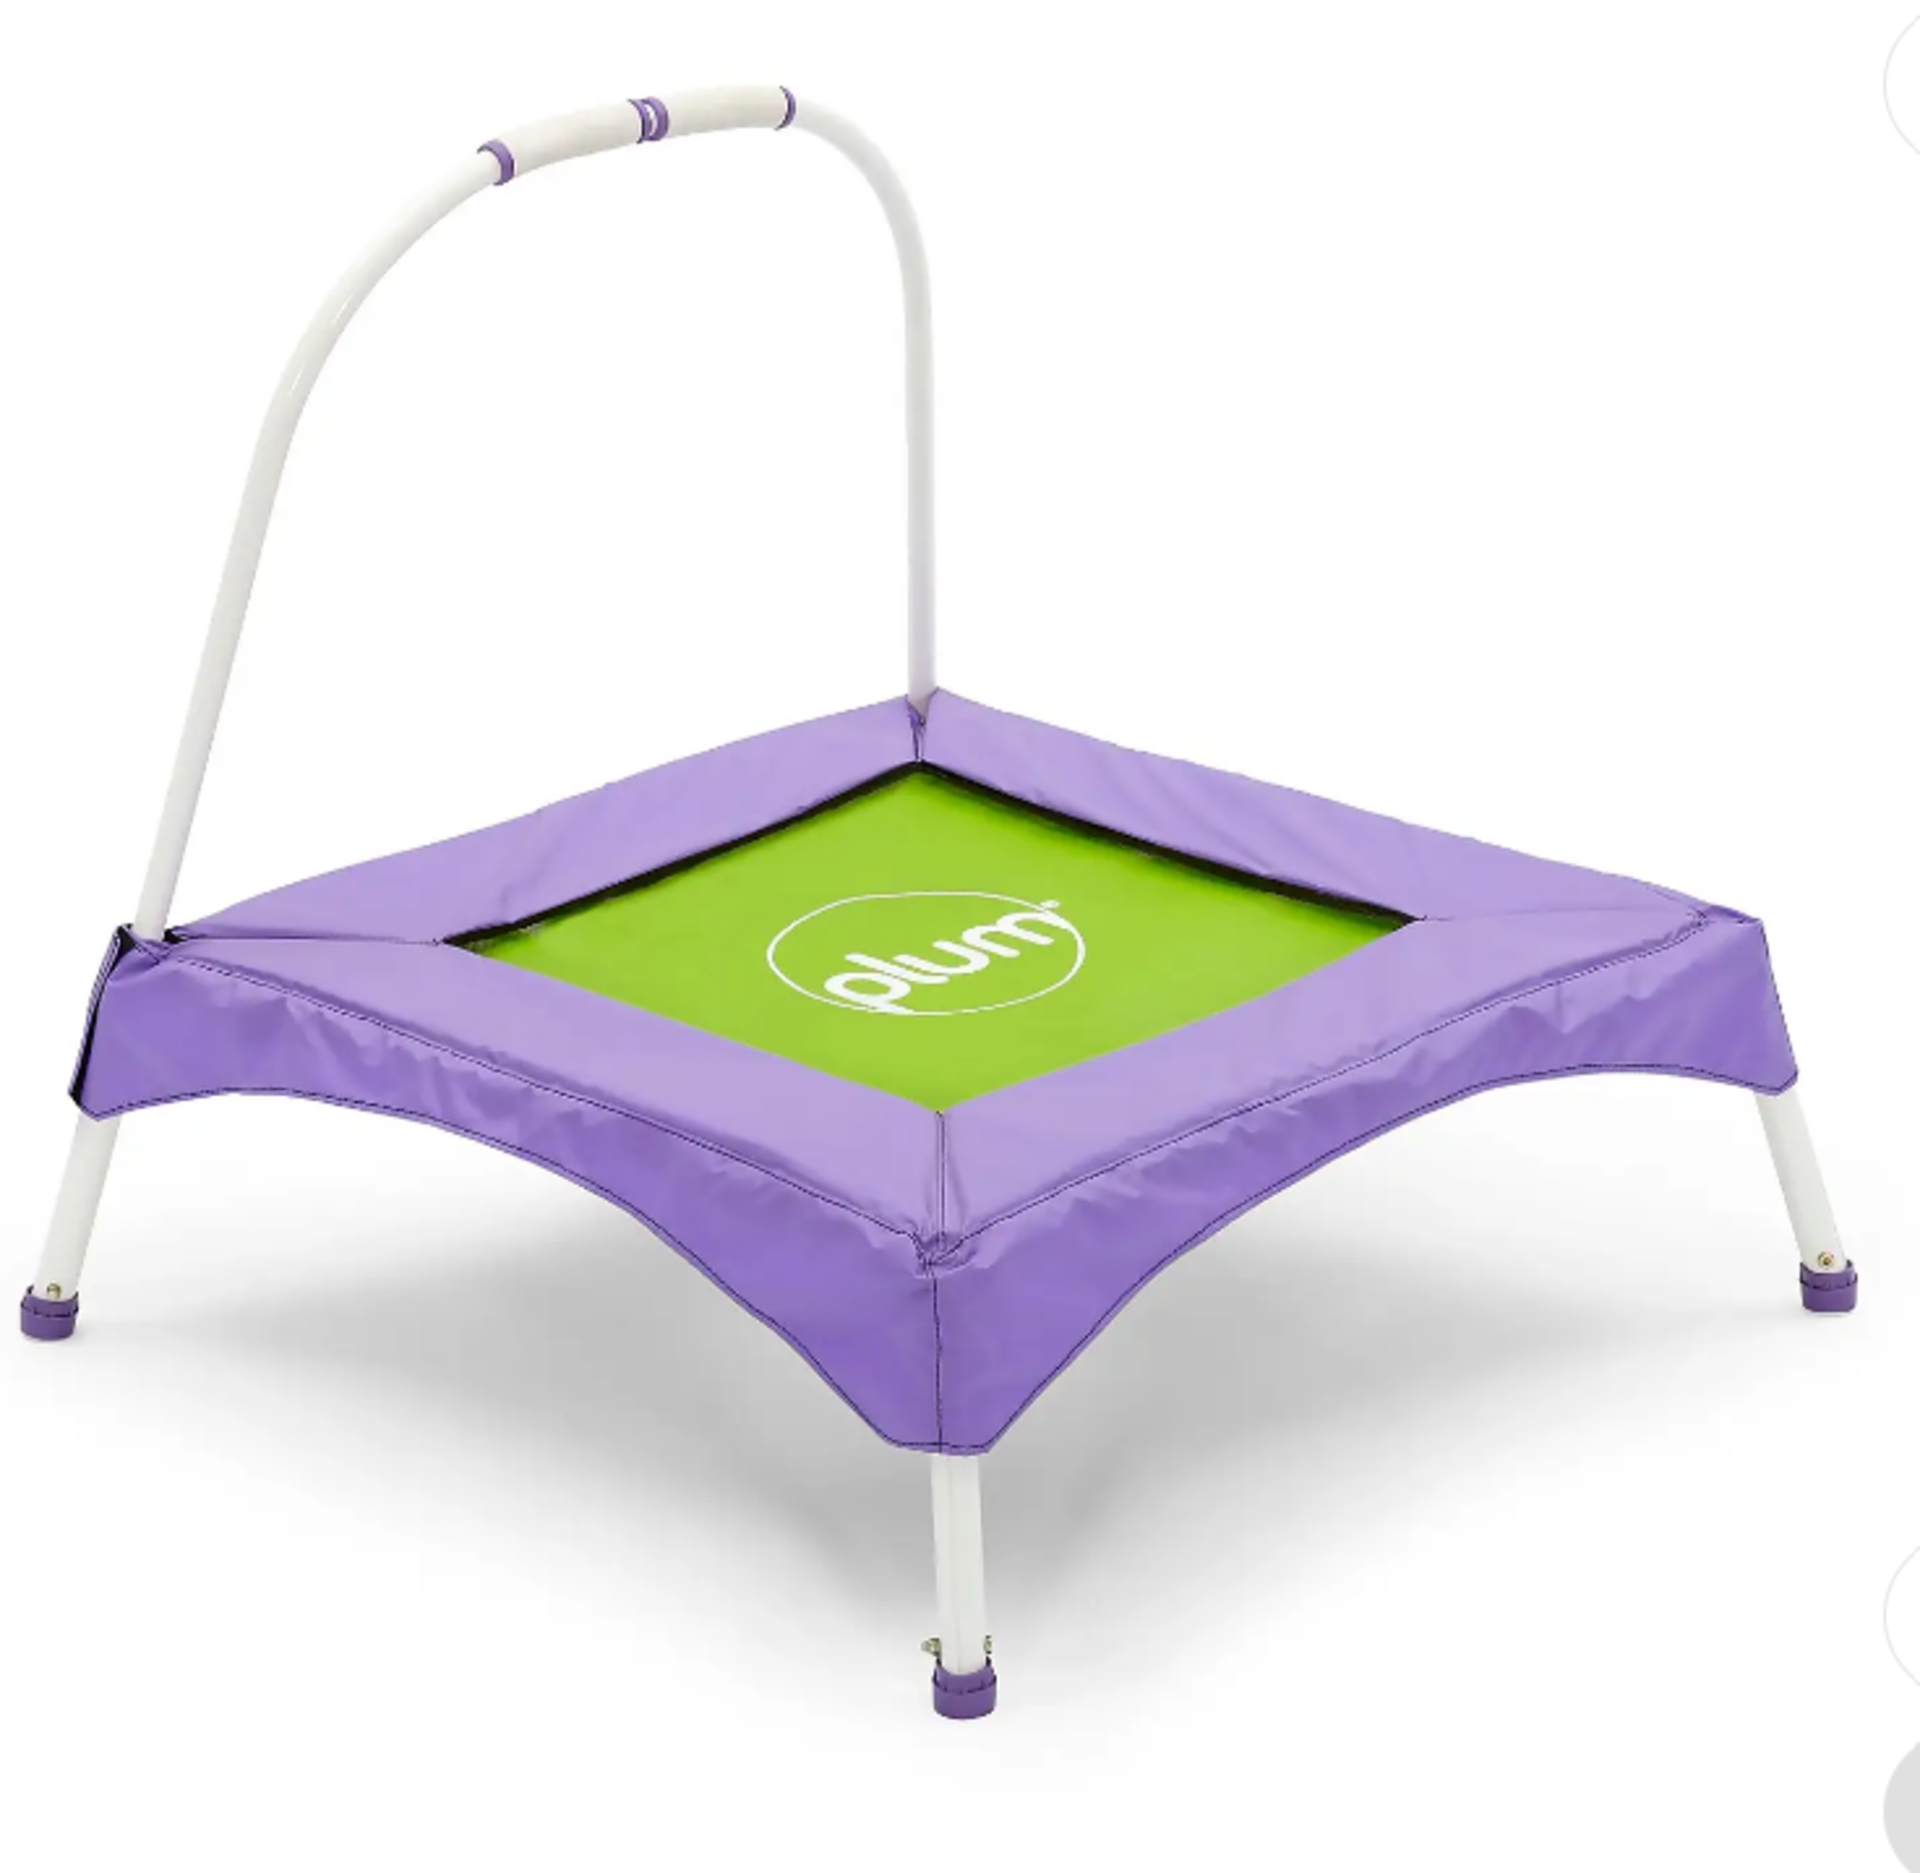 Plum® Junior Bouncer - Purple/Green. RRP £75.00. An ideal first trampoline for your child, the Plum®